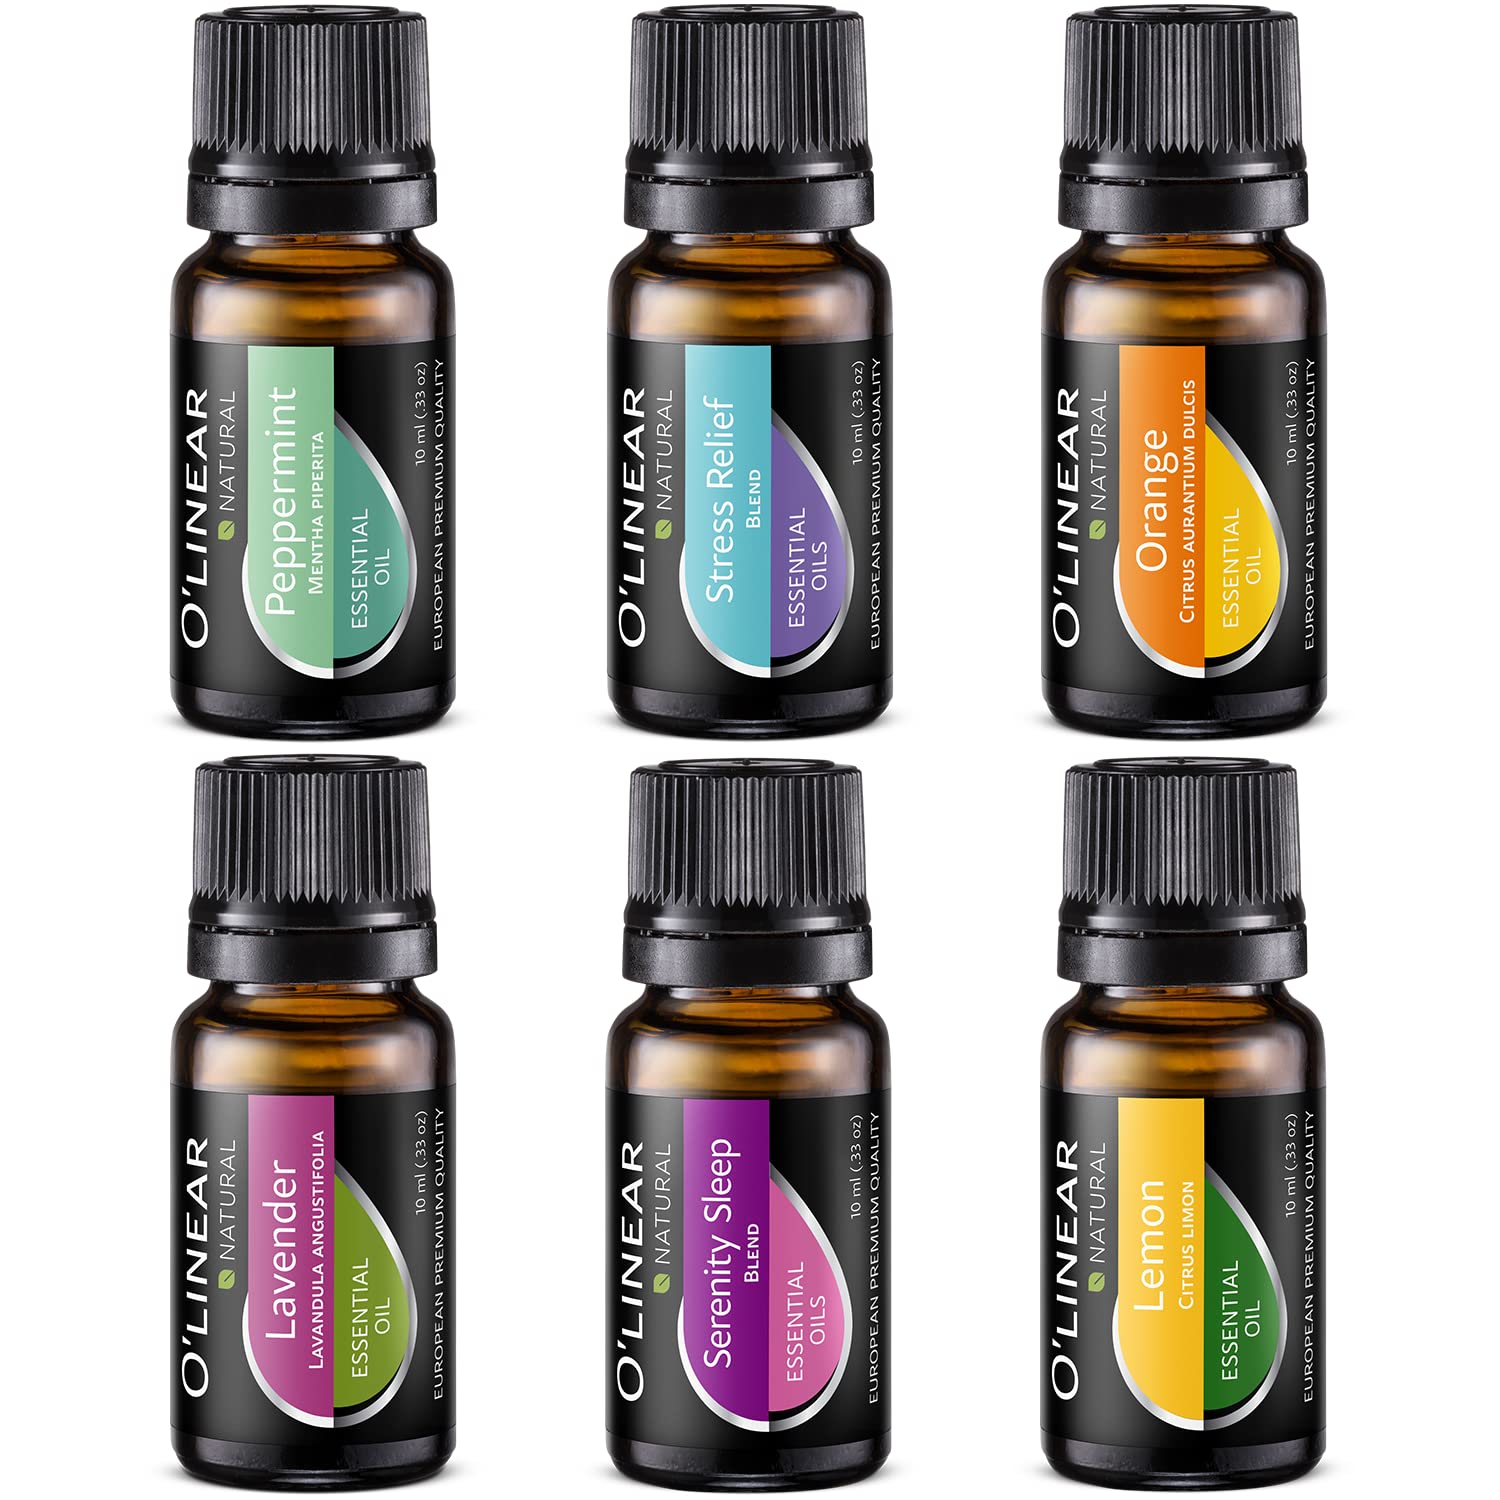 Essential Oils Set 4 Oils & 2 Blends Top 6 Essential Oils for Diffusers for  Home